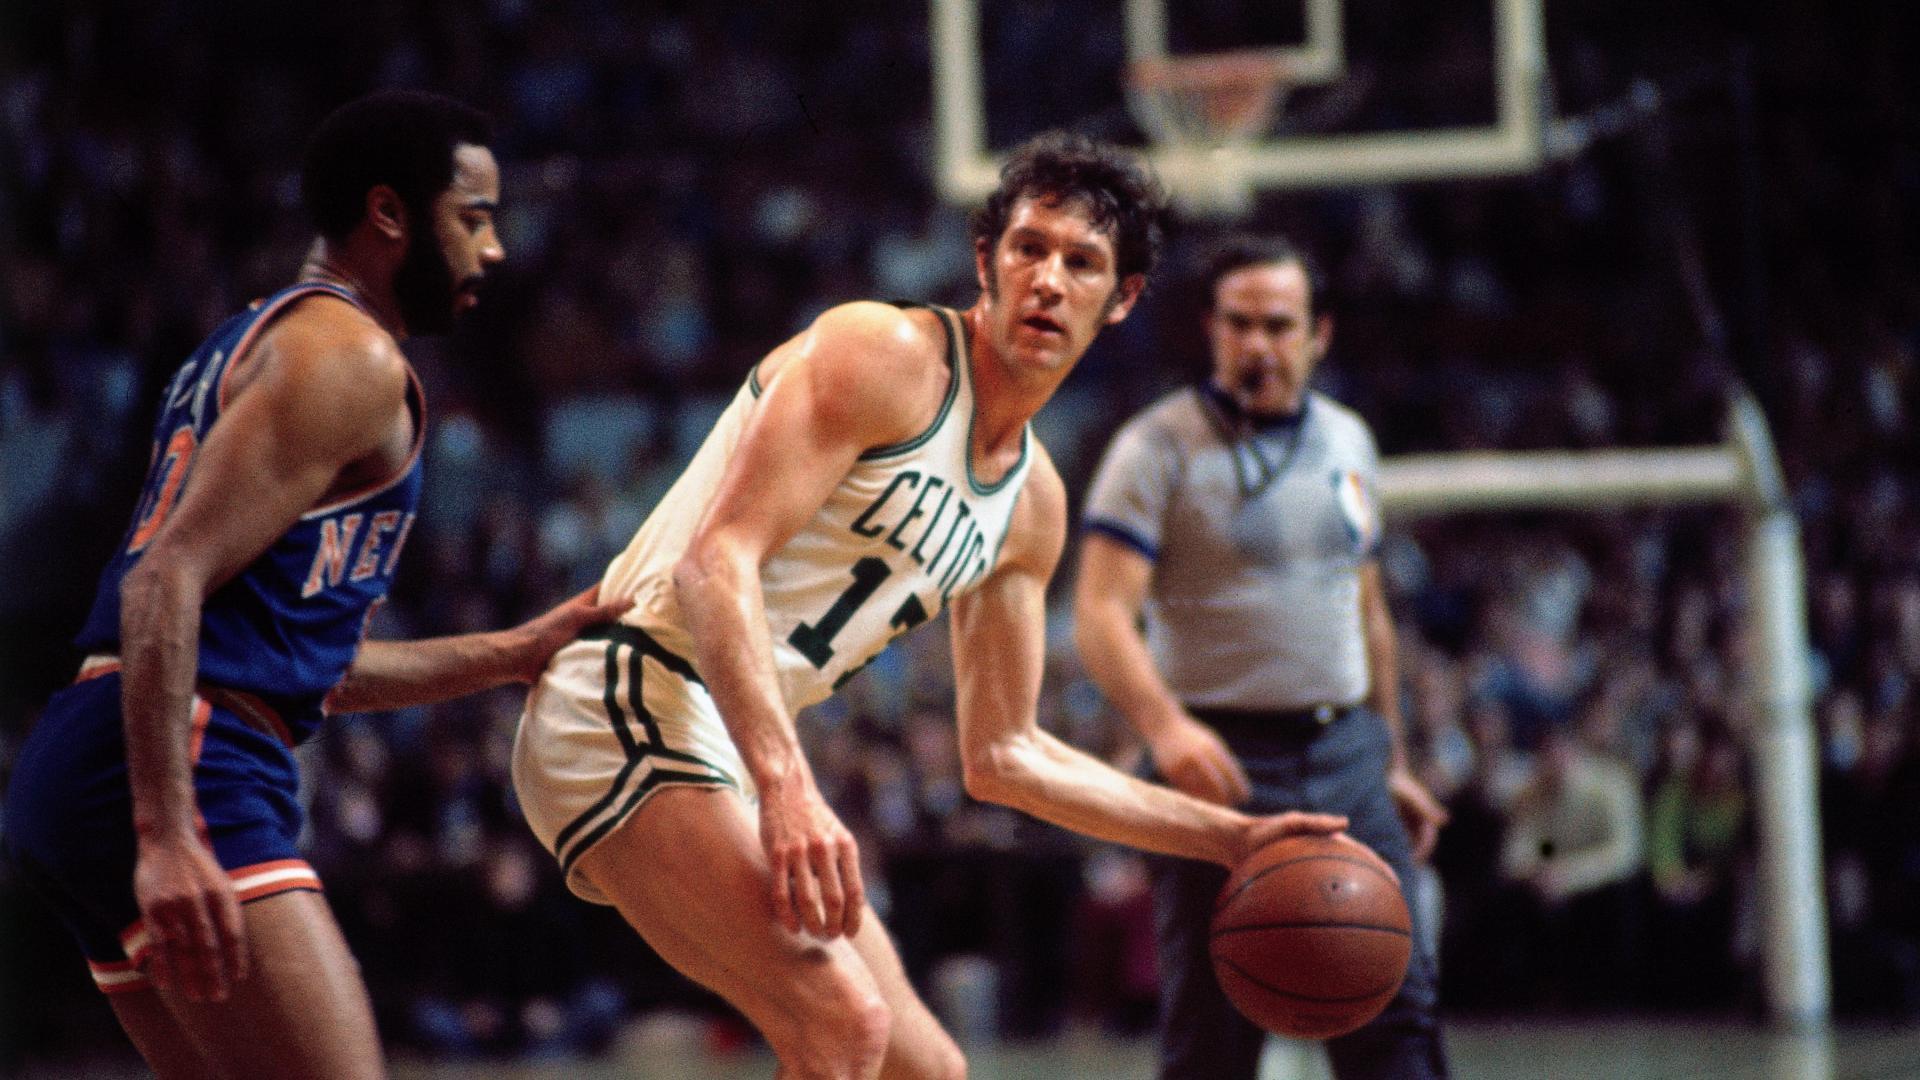 Cleveland Brown John Havlicek could of been great will never know?